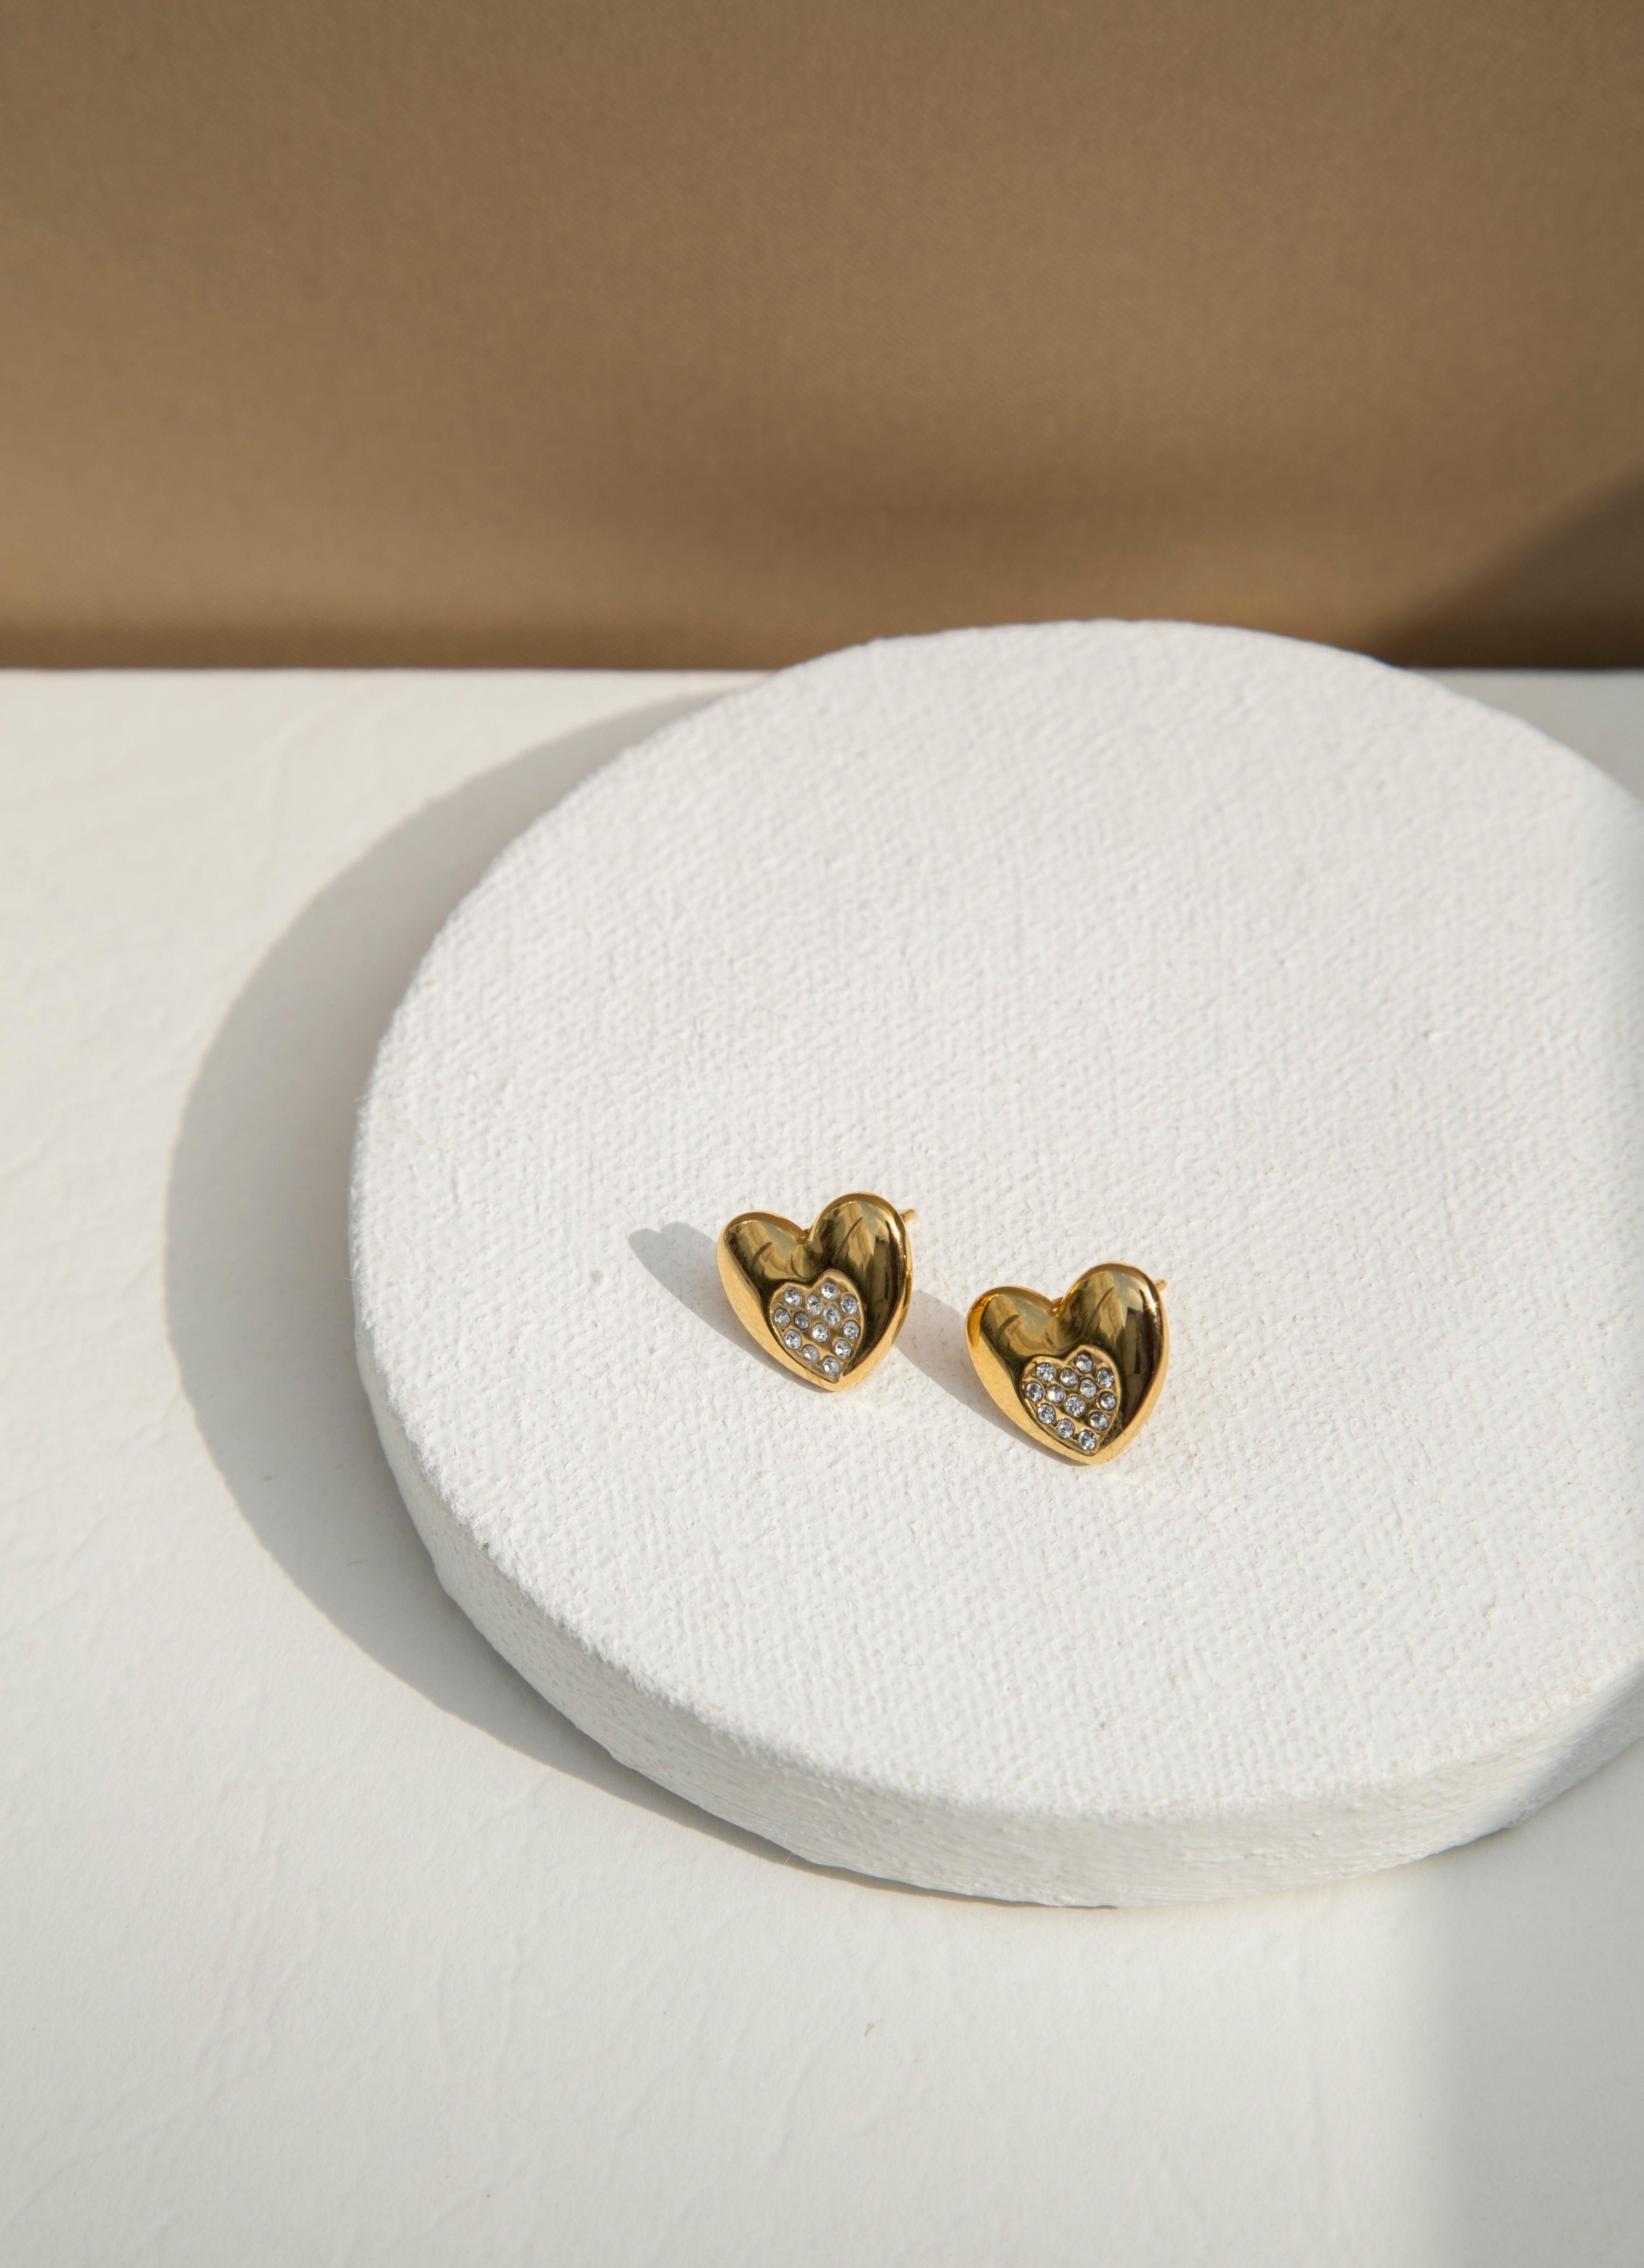 Material : Stainless Steel, Cubic Zircon  -18k Gold Plated   - Hypoallergenic   - Tarnish & Water Resistant   Dimension : Length 1.20cm   Weight : About 3g    Your search for cutest studs is over. Introducing Gigil Studs. Heart shaped stainless steel stud earrings, delicately plated in 18k gold and embedded with sparkling cubic zirconia that sparkle with every movement. These studs are definitely a must have and will get you lots of compliments.